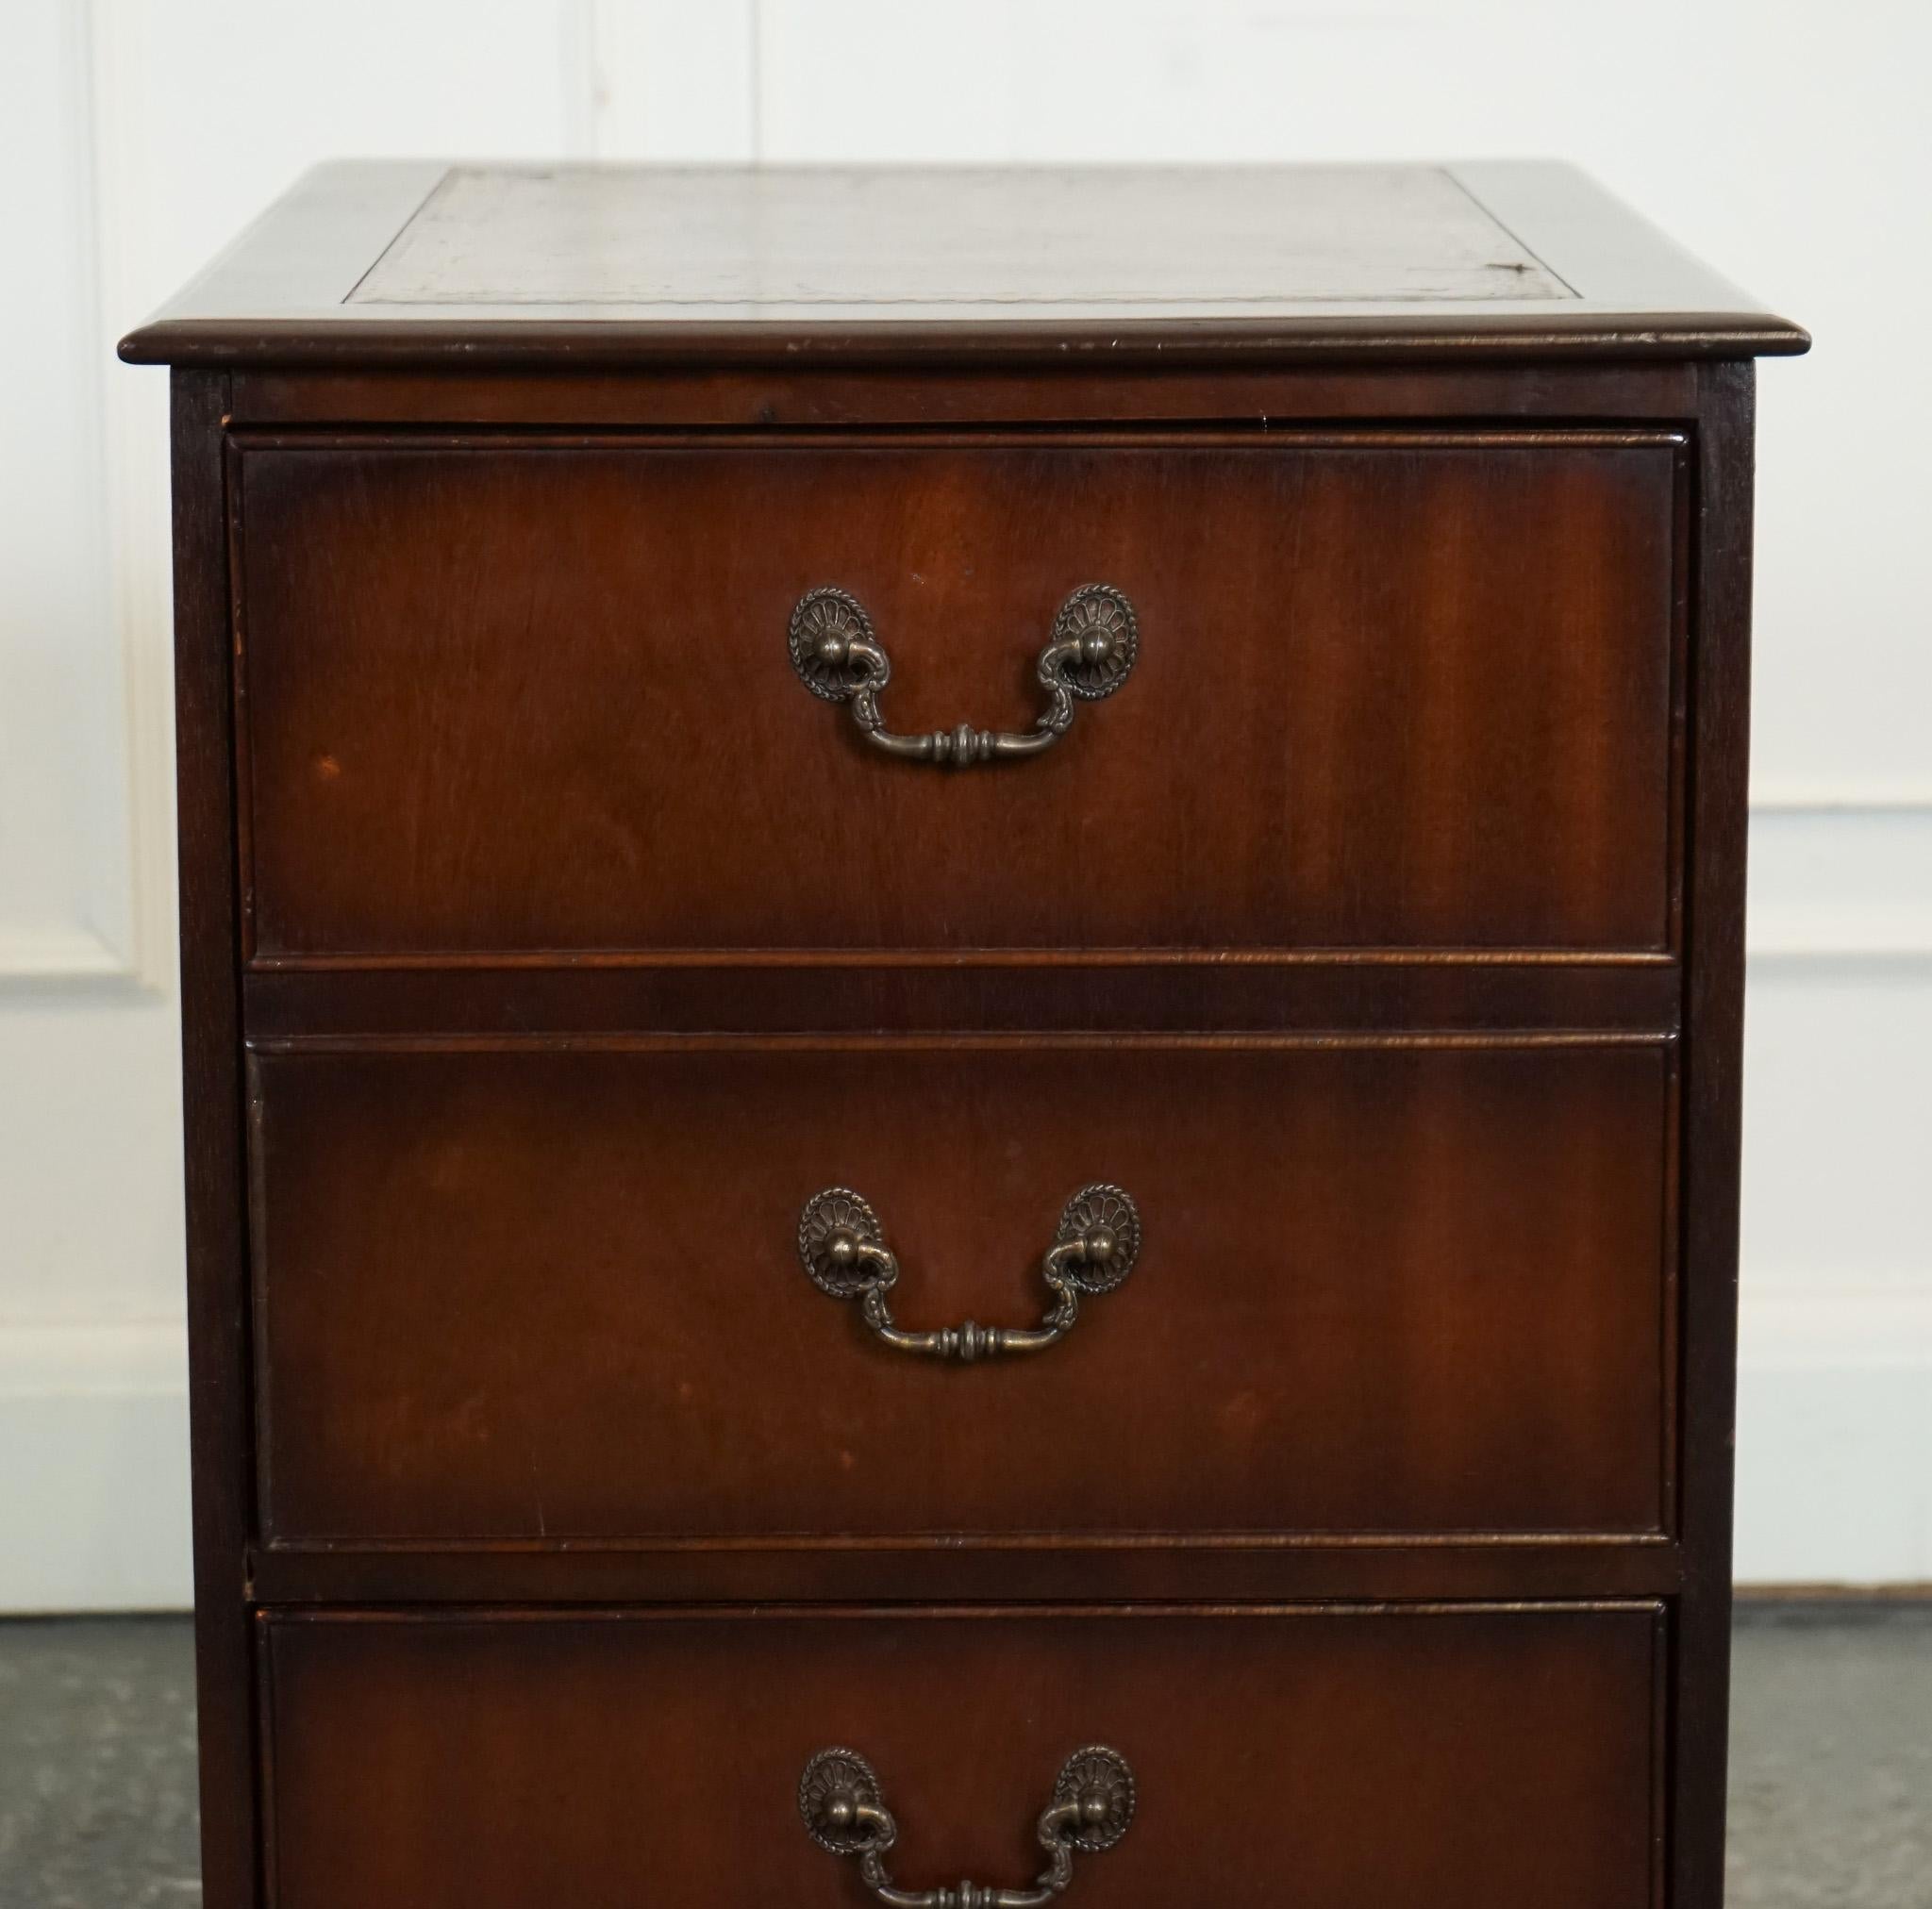 VINTAGE MAHOGANY GOLD EMBOSSED BROWN LEATHER TOP FILLING CABiNET In Good Condition For Sale In Pulborough, GB